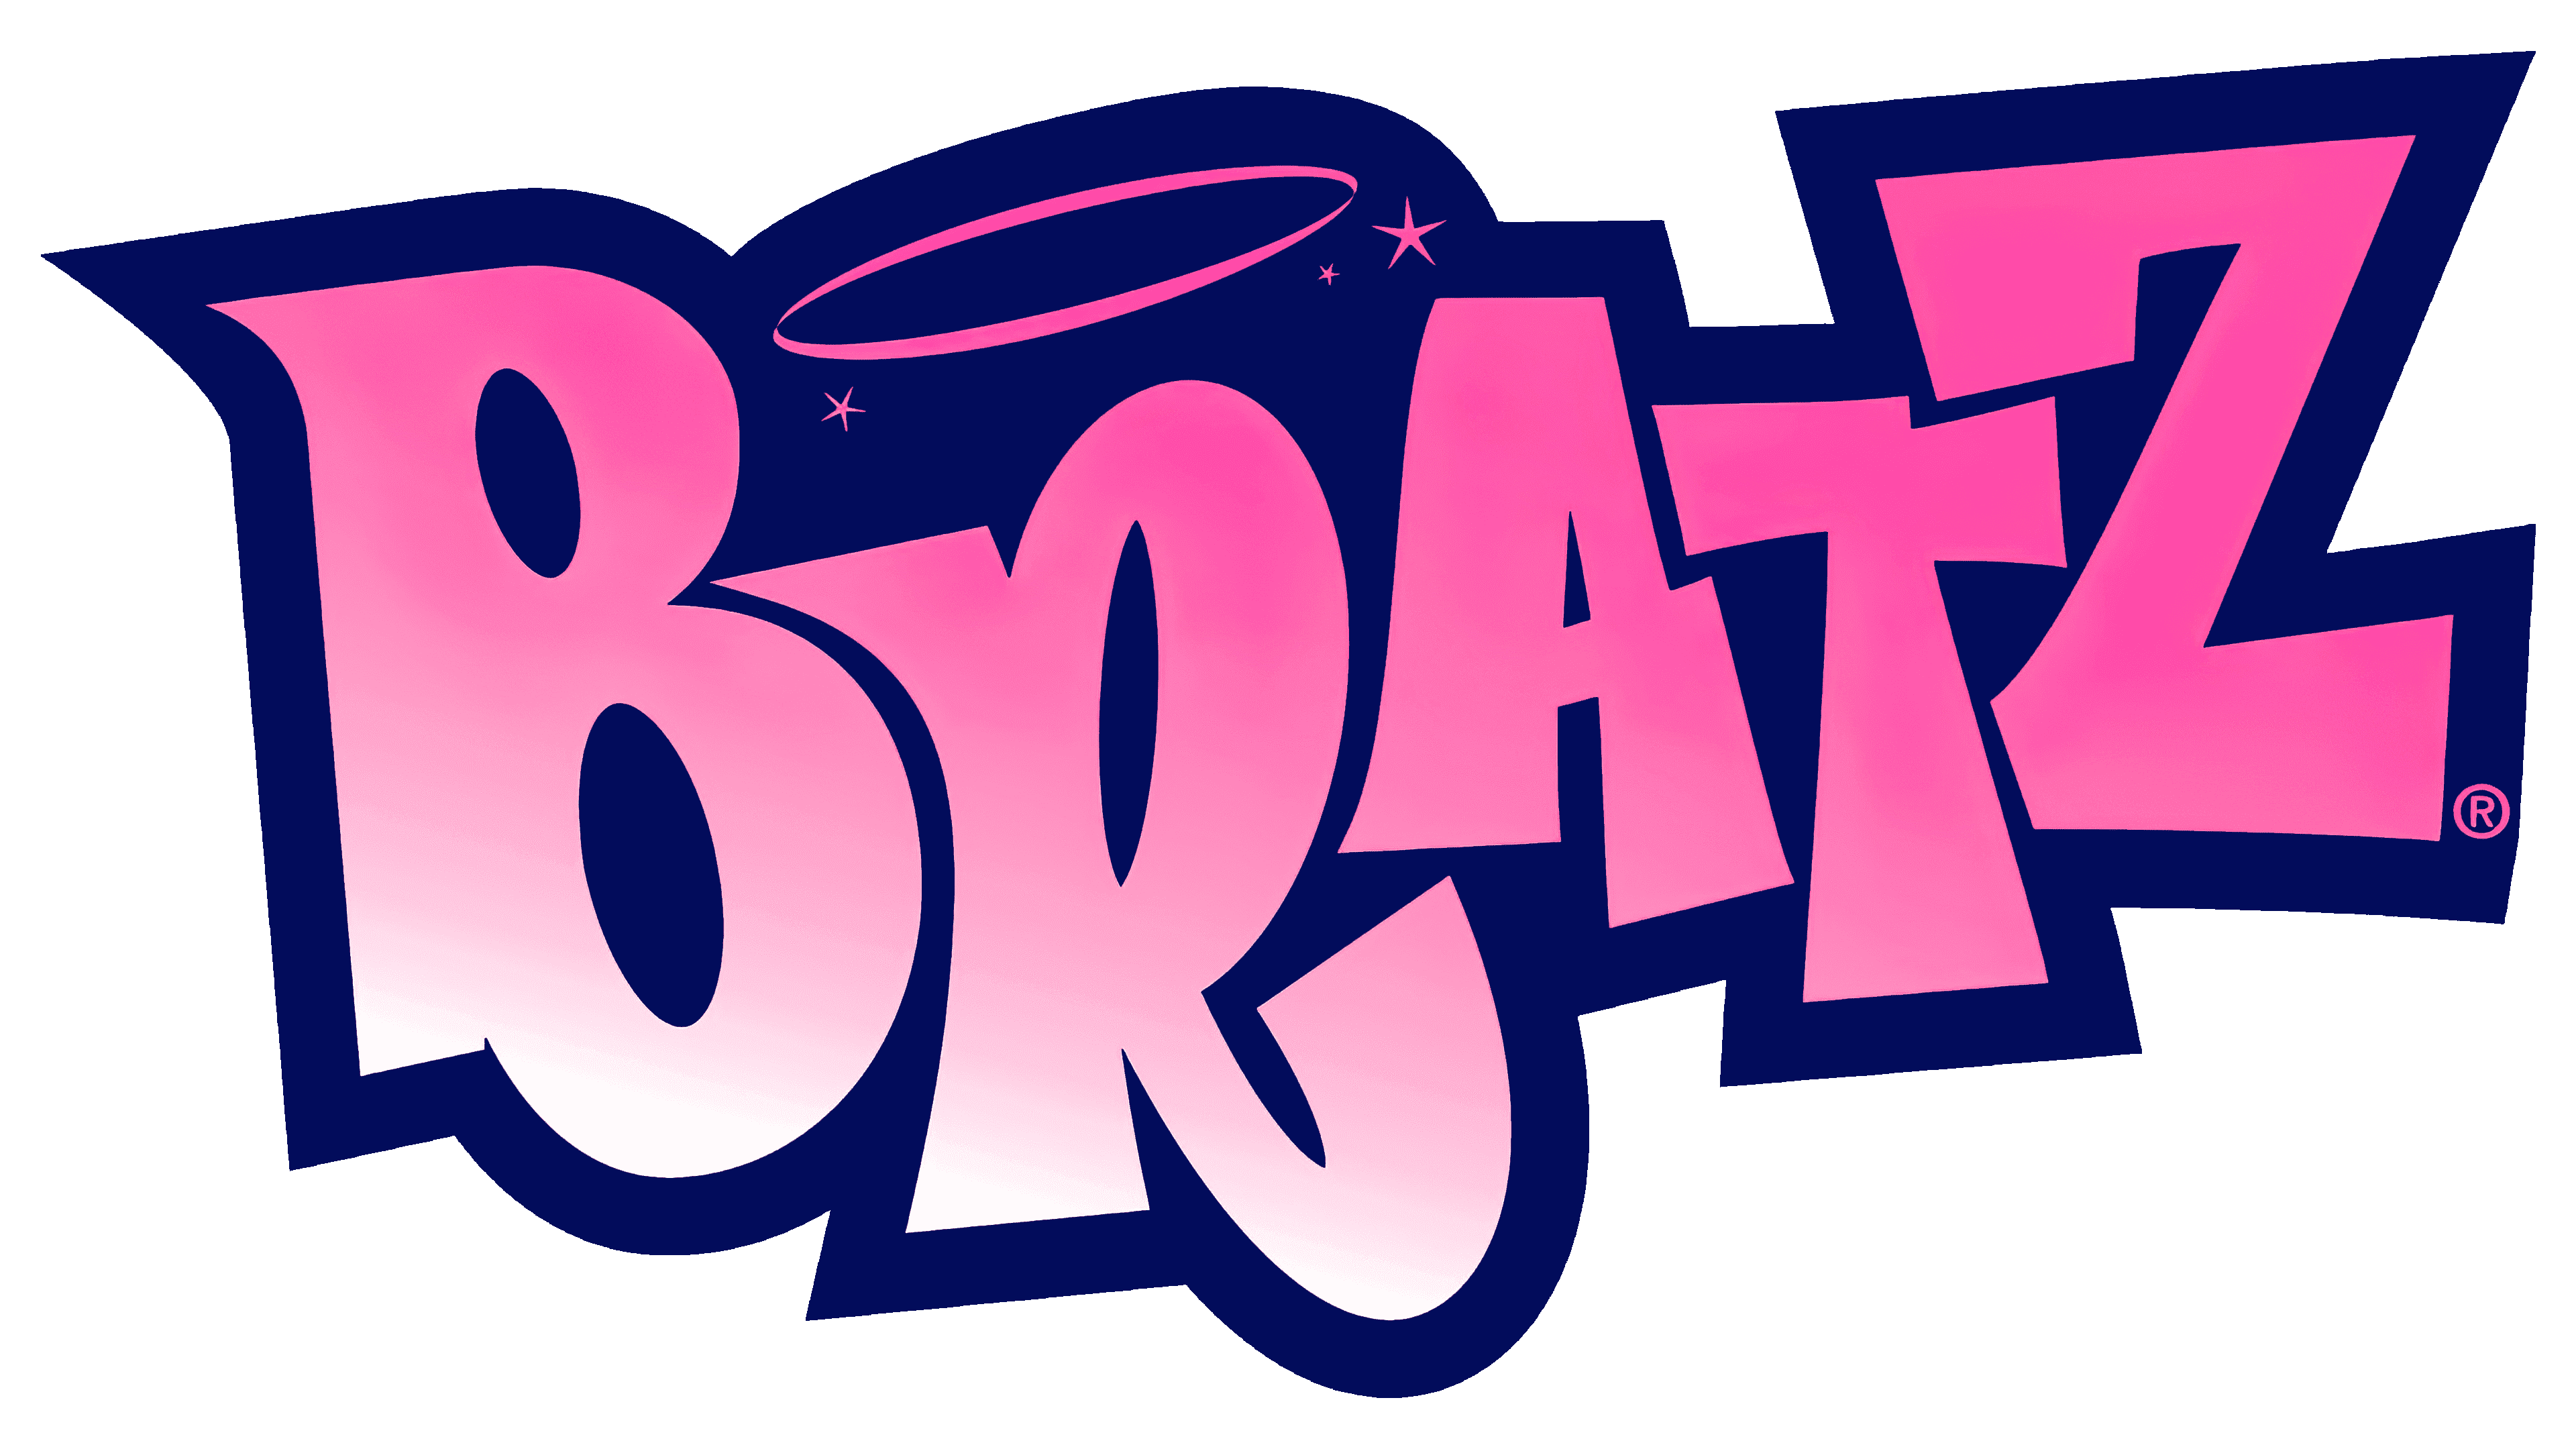 Since all the lettering on the Bratz logos was created by hand, they are se...